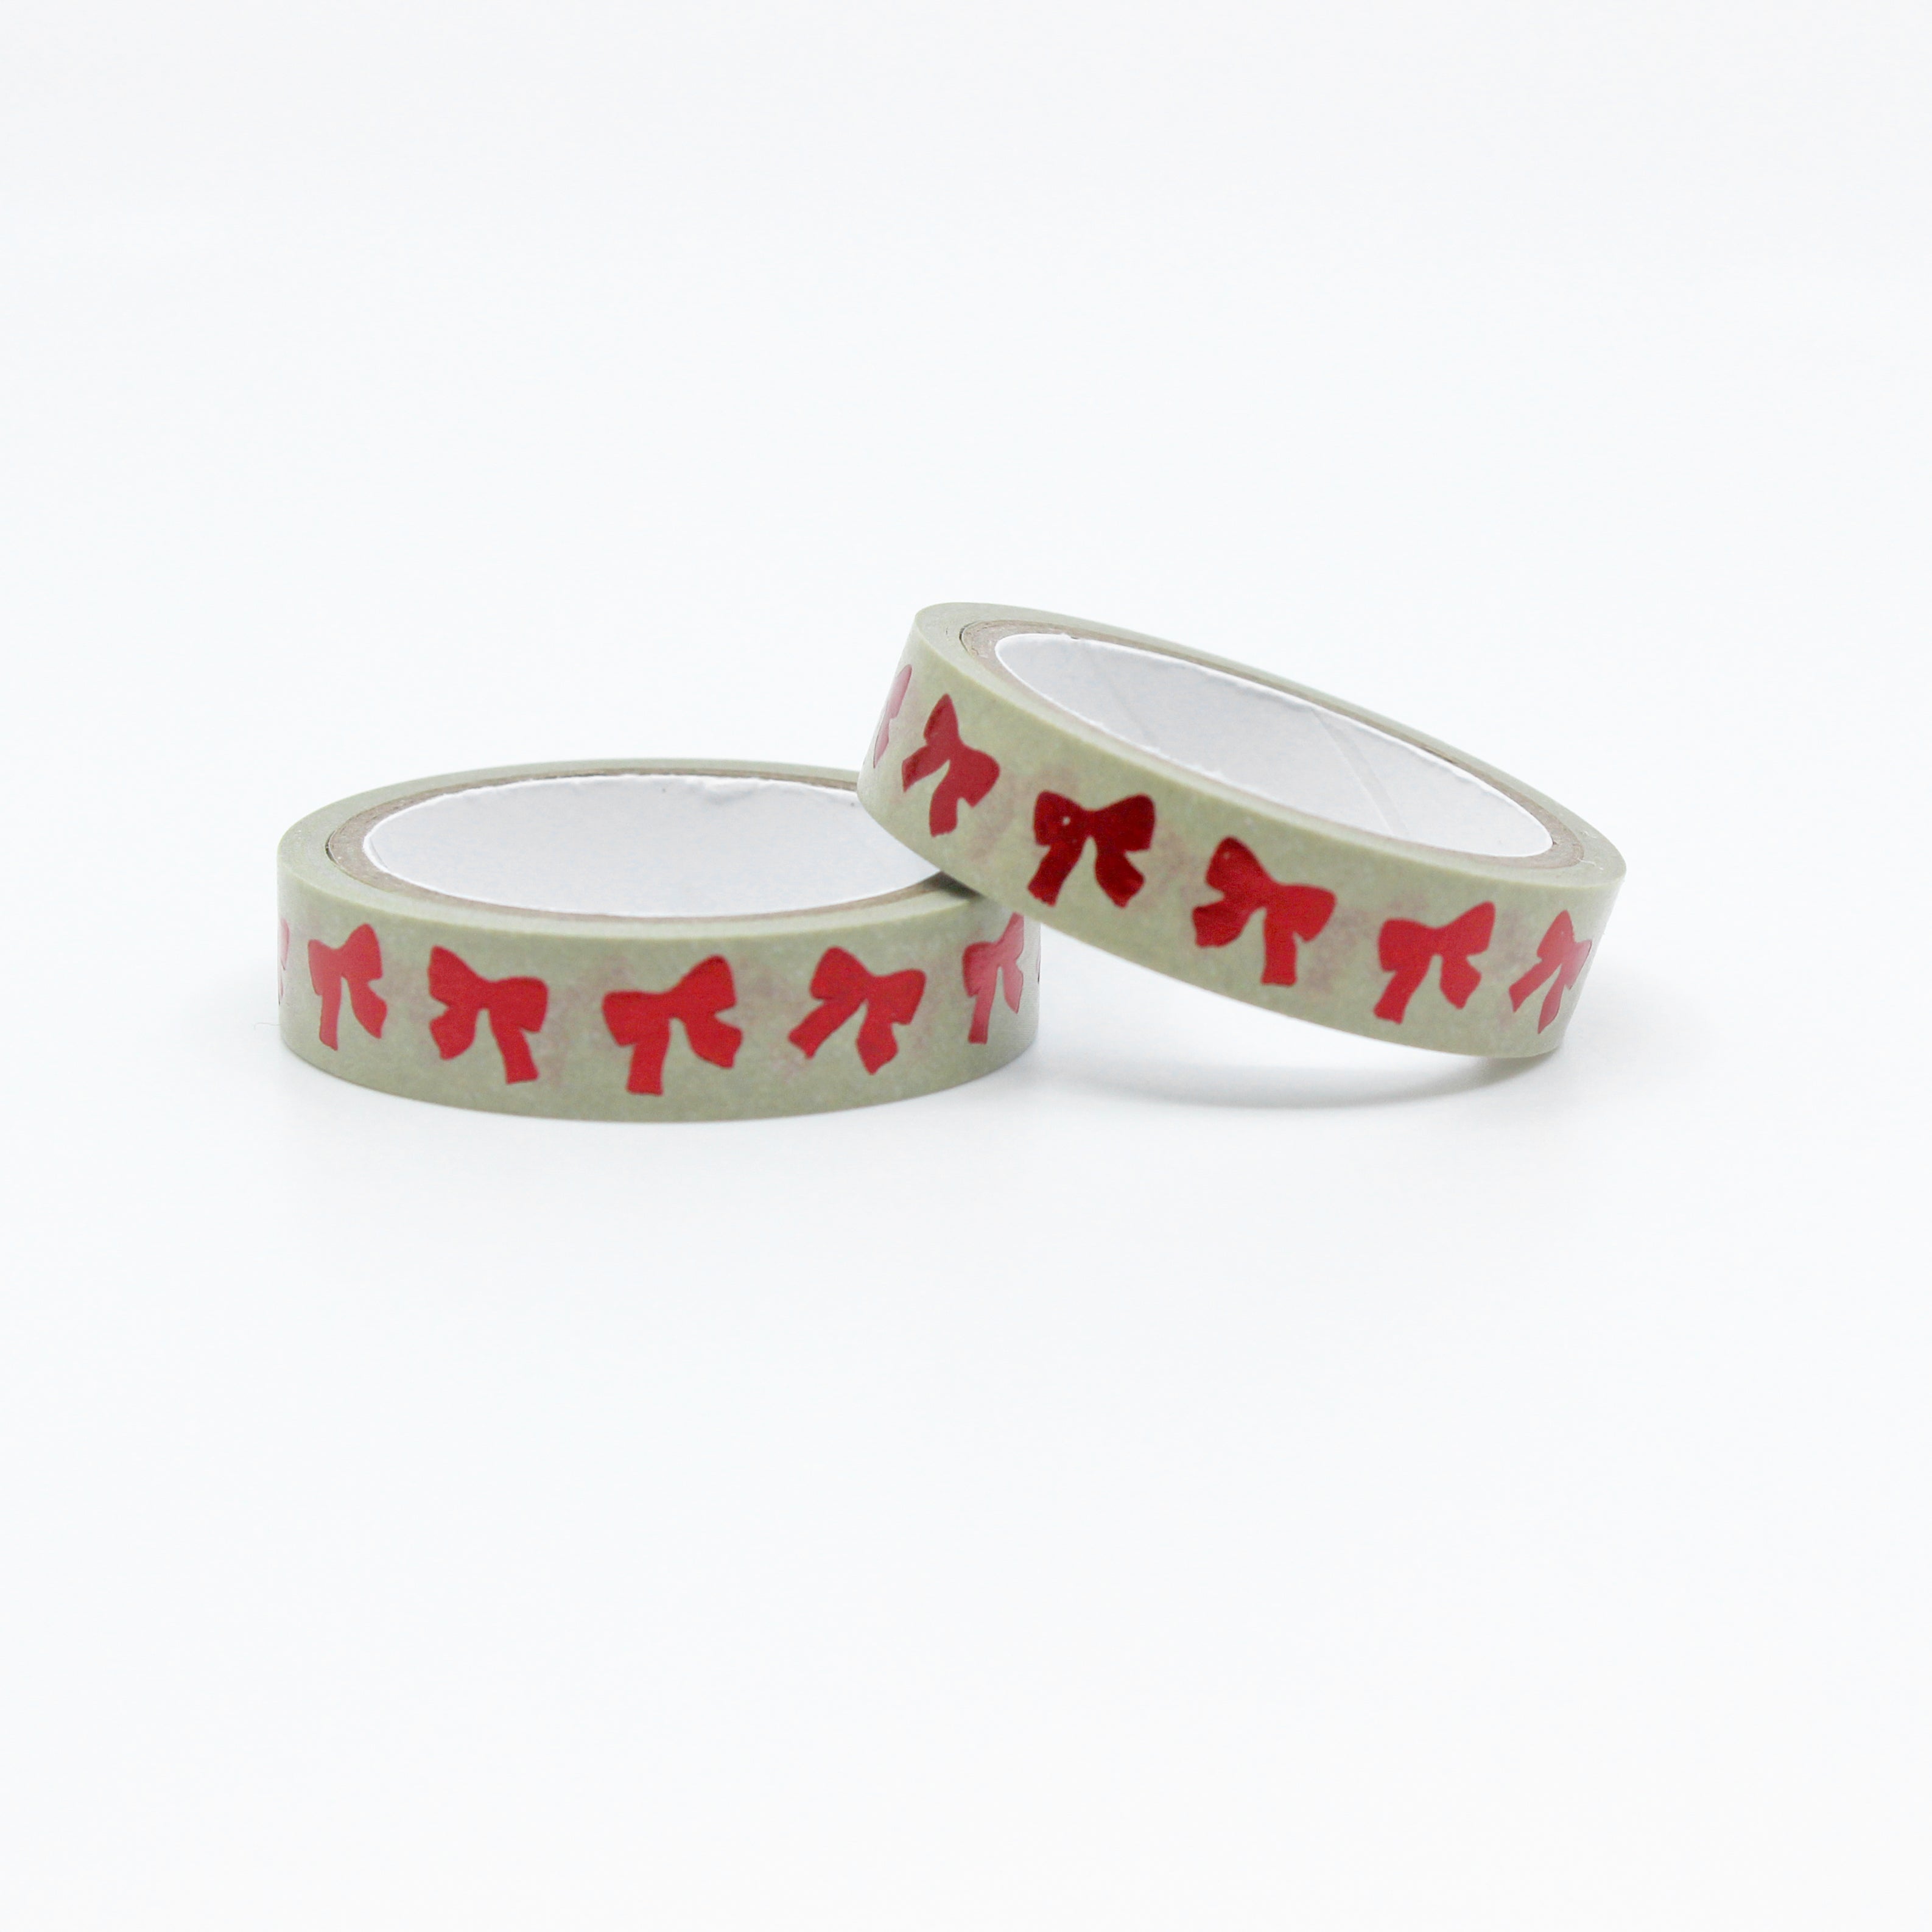 Infuse your creations with the magic of the holiday season using our washi tape adorned with classic red bow patterns, evoking the joy and festivity of holiday decorations. This tape is sold at BBB Supplies Craft Shop.